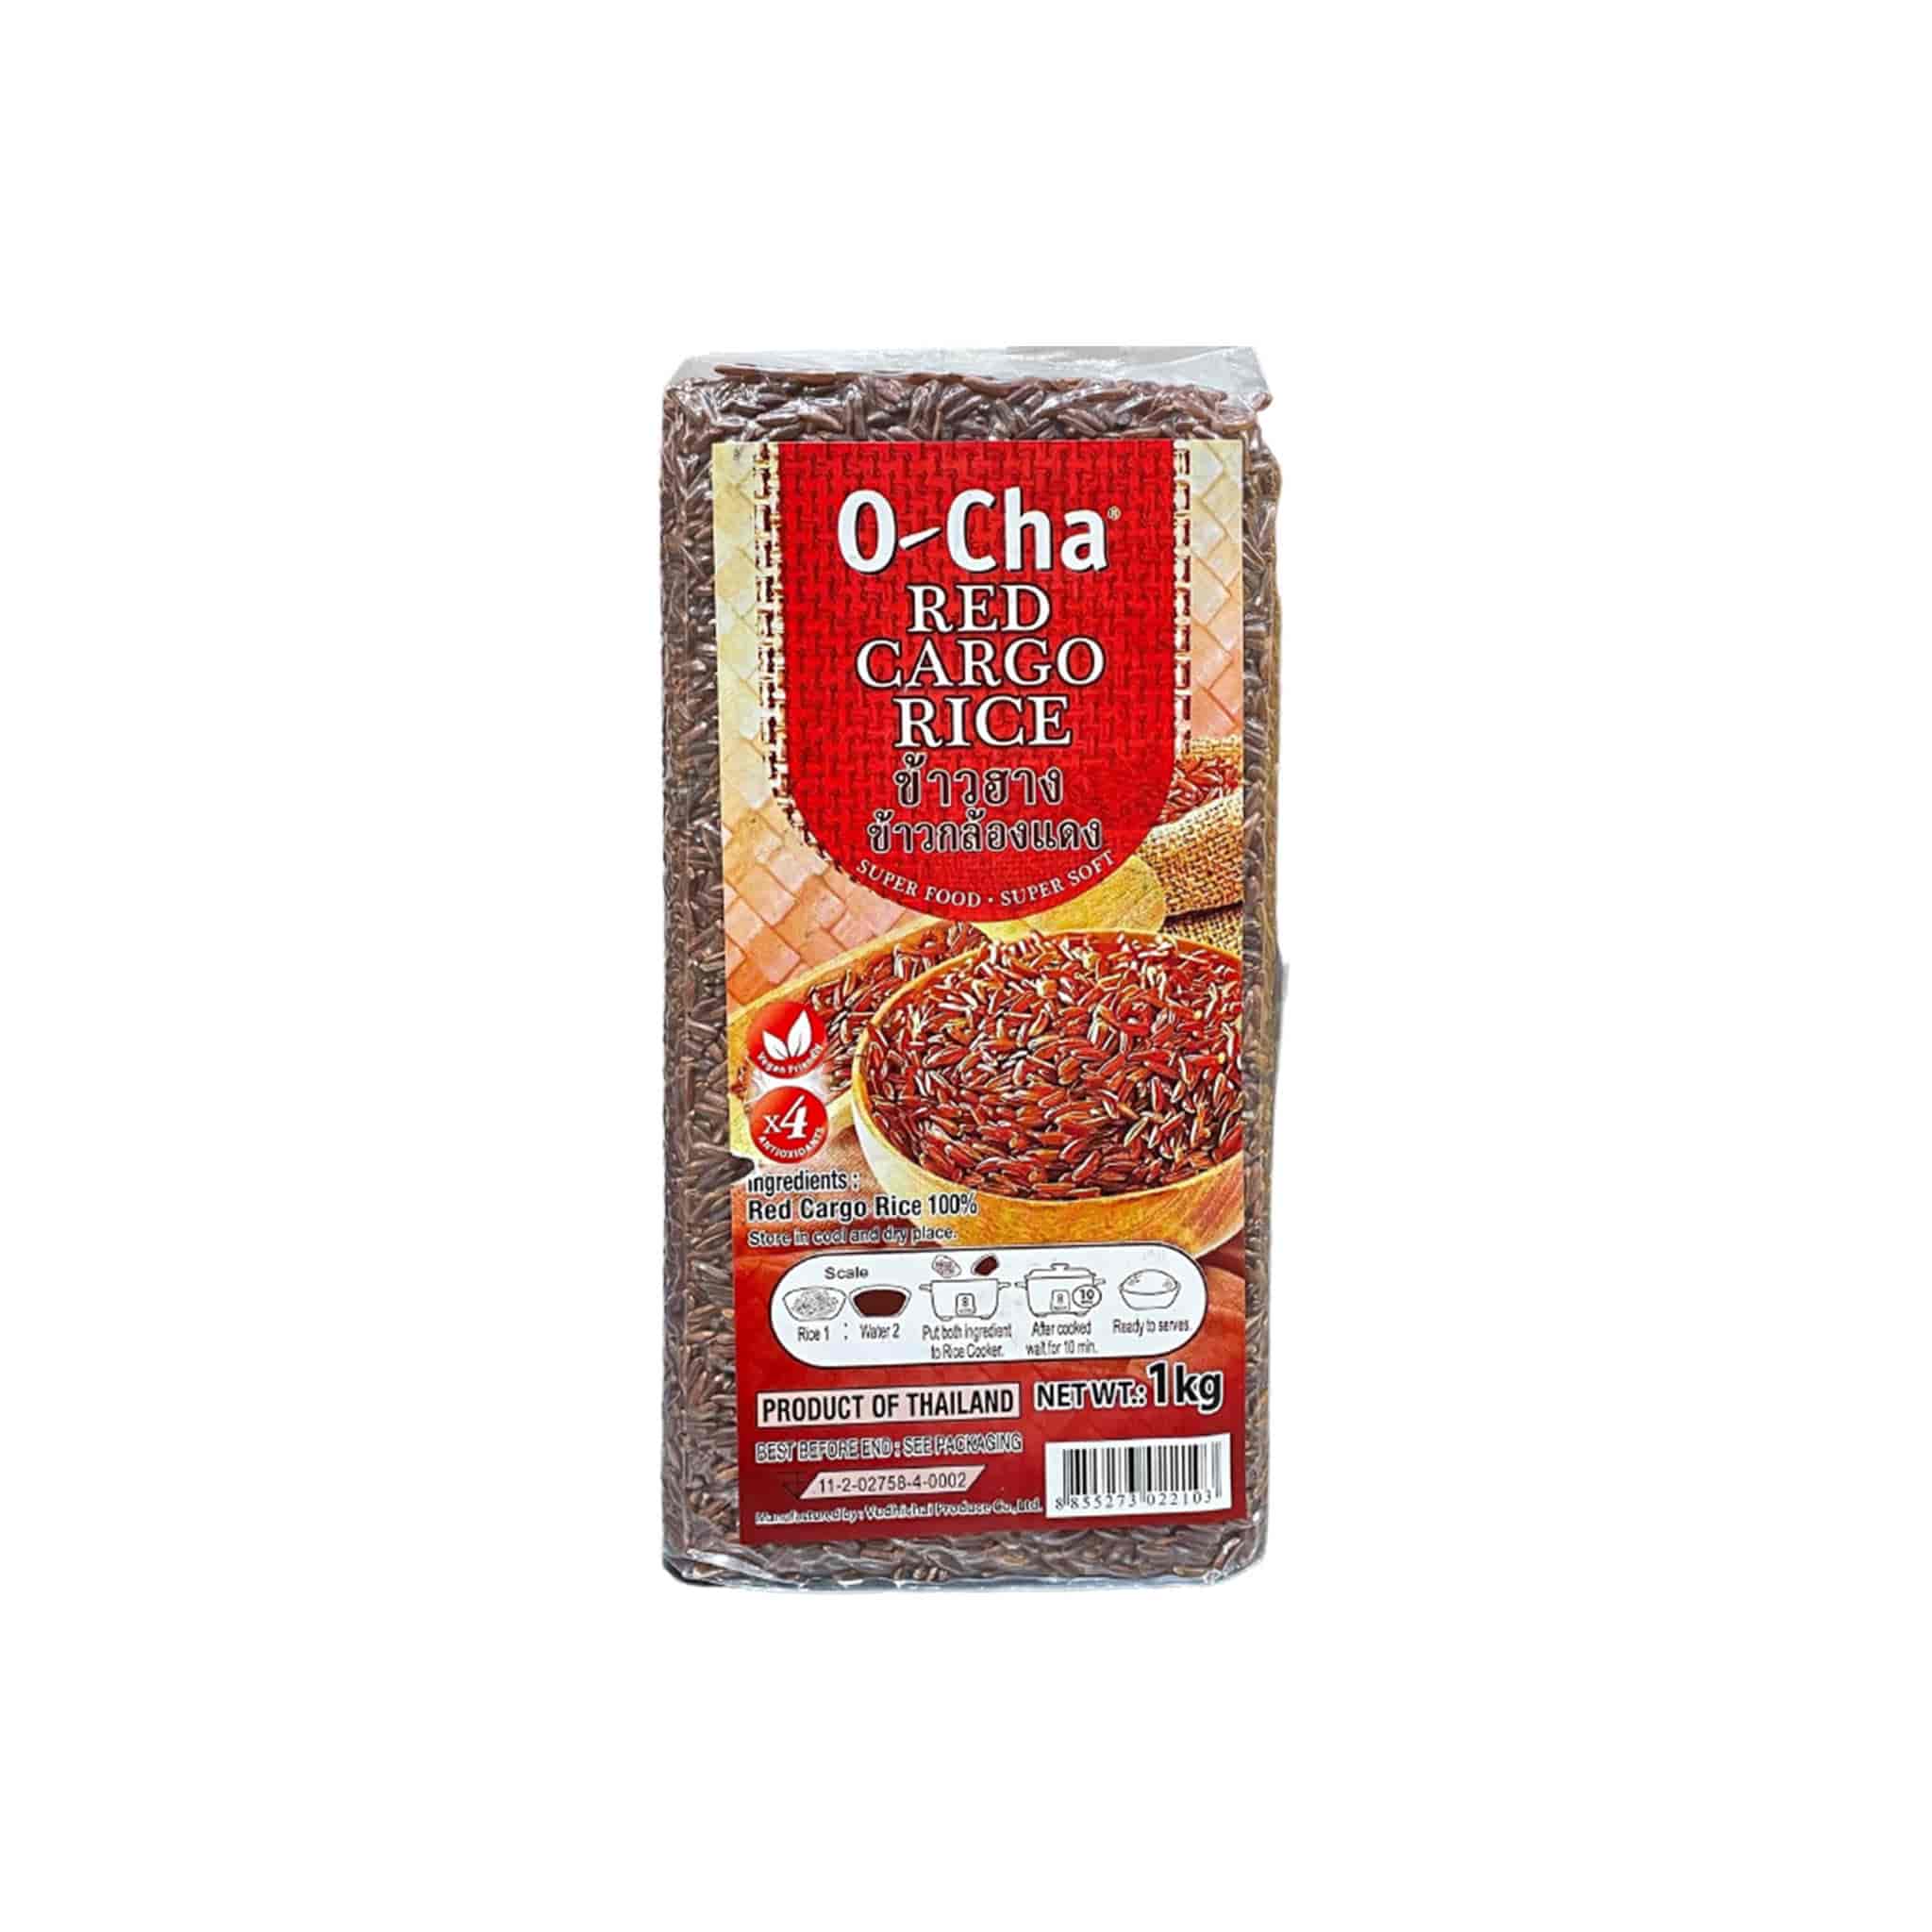 O Cha Red Cargo Rice, 1kg